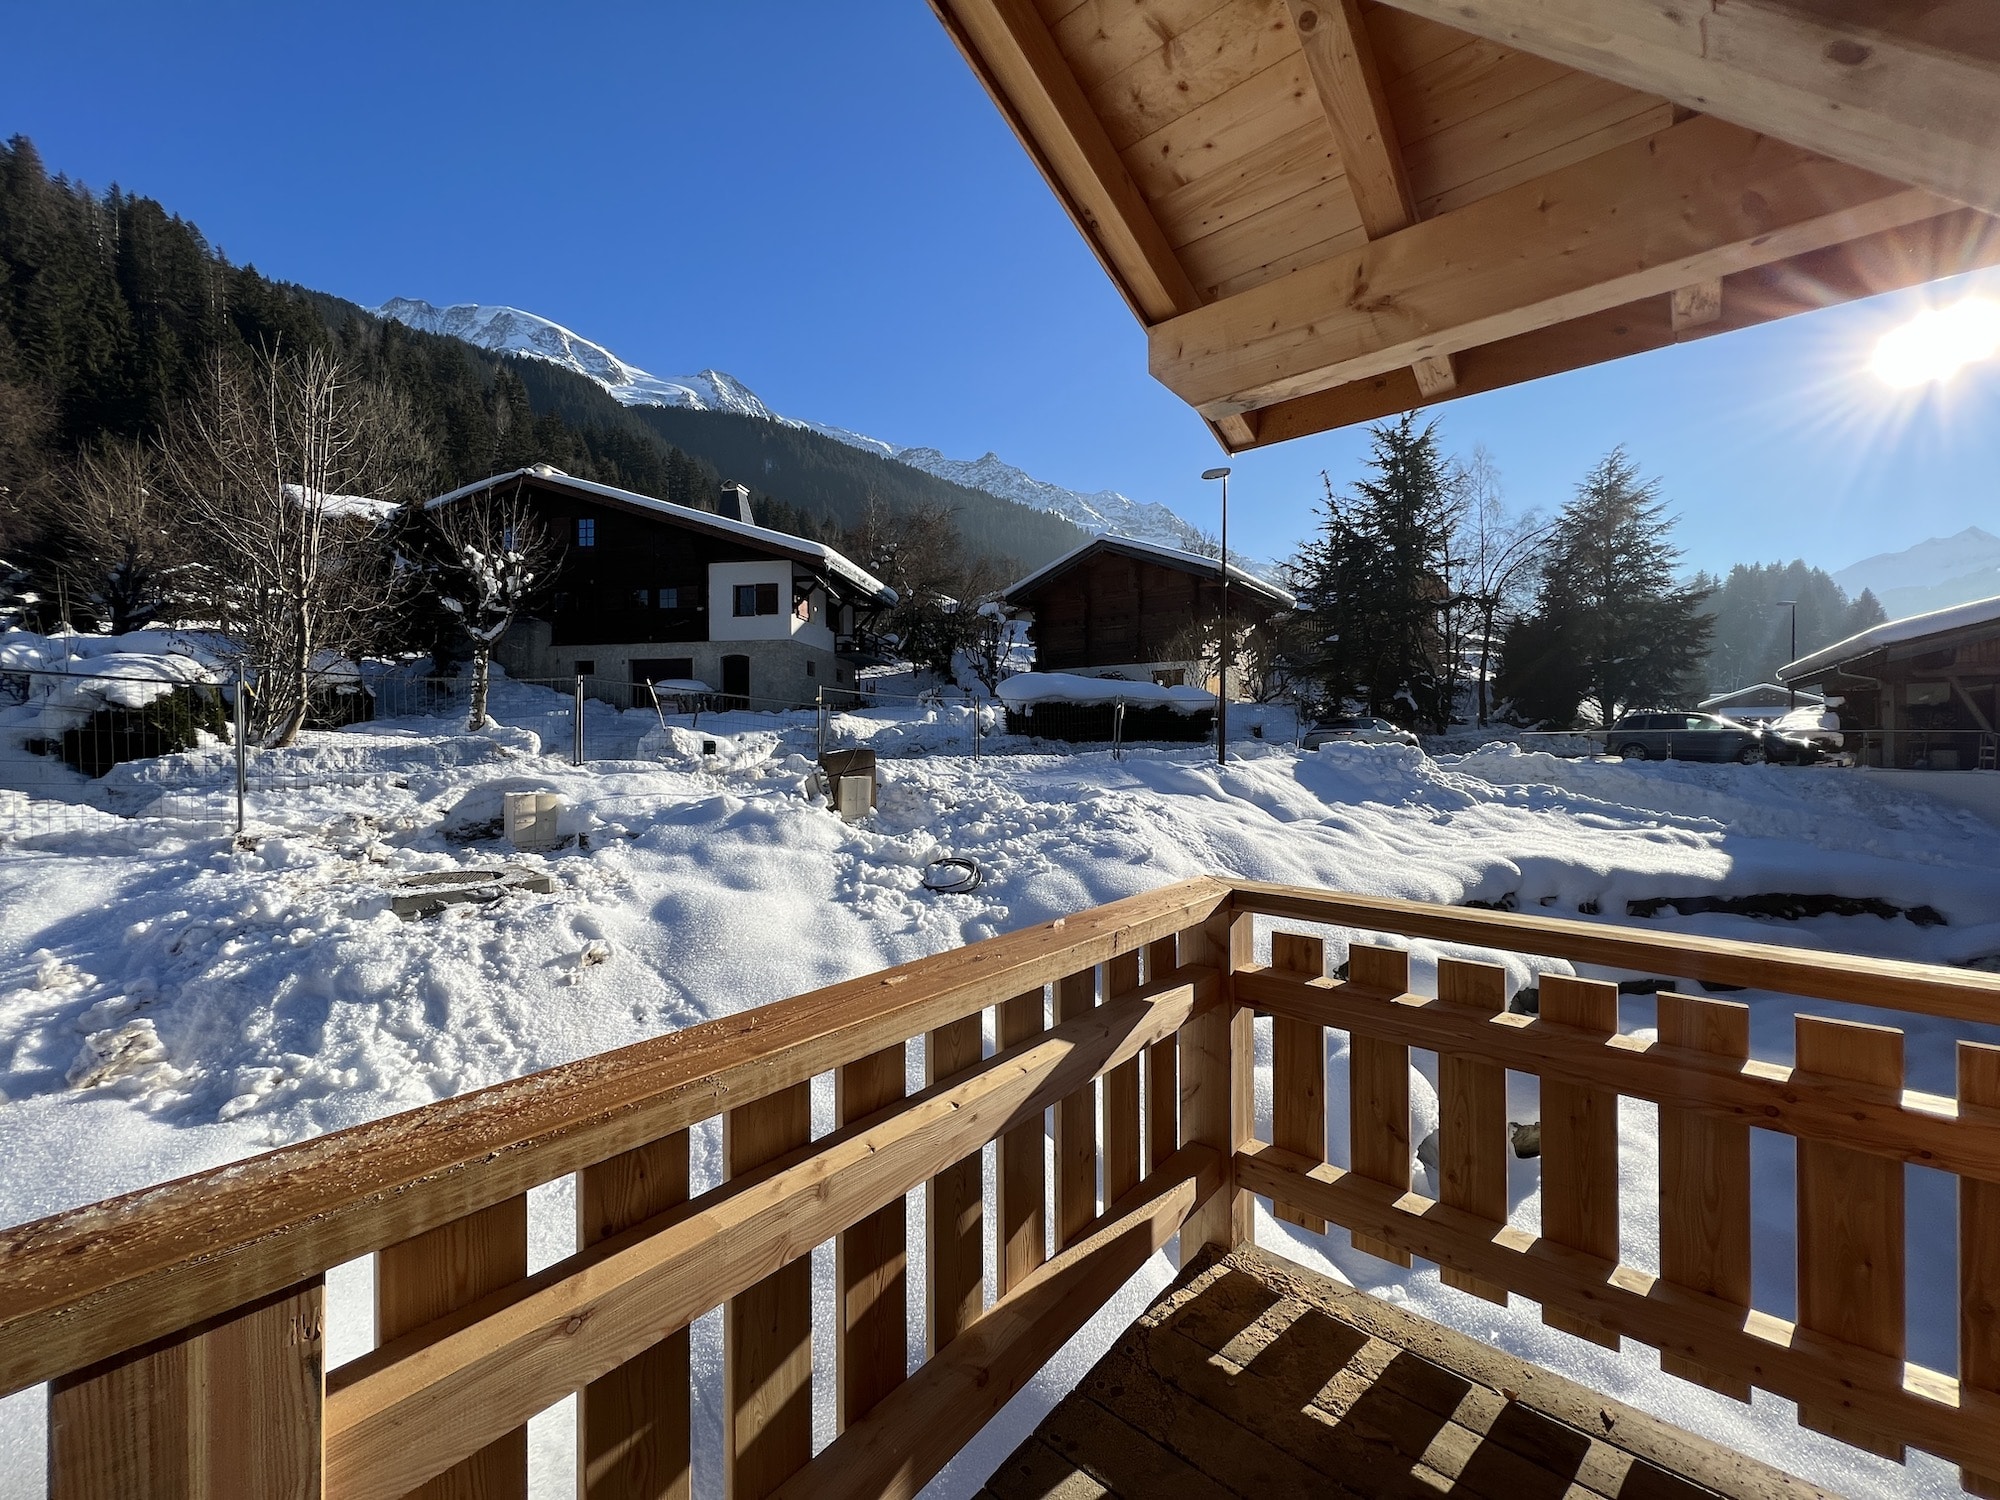 NEW LUXURY CHALETS IN THE ALPS